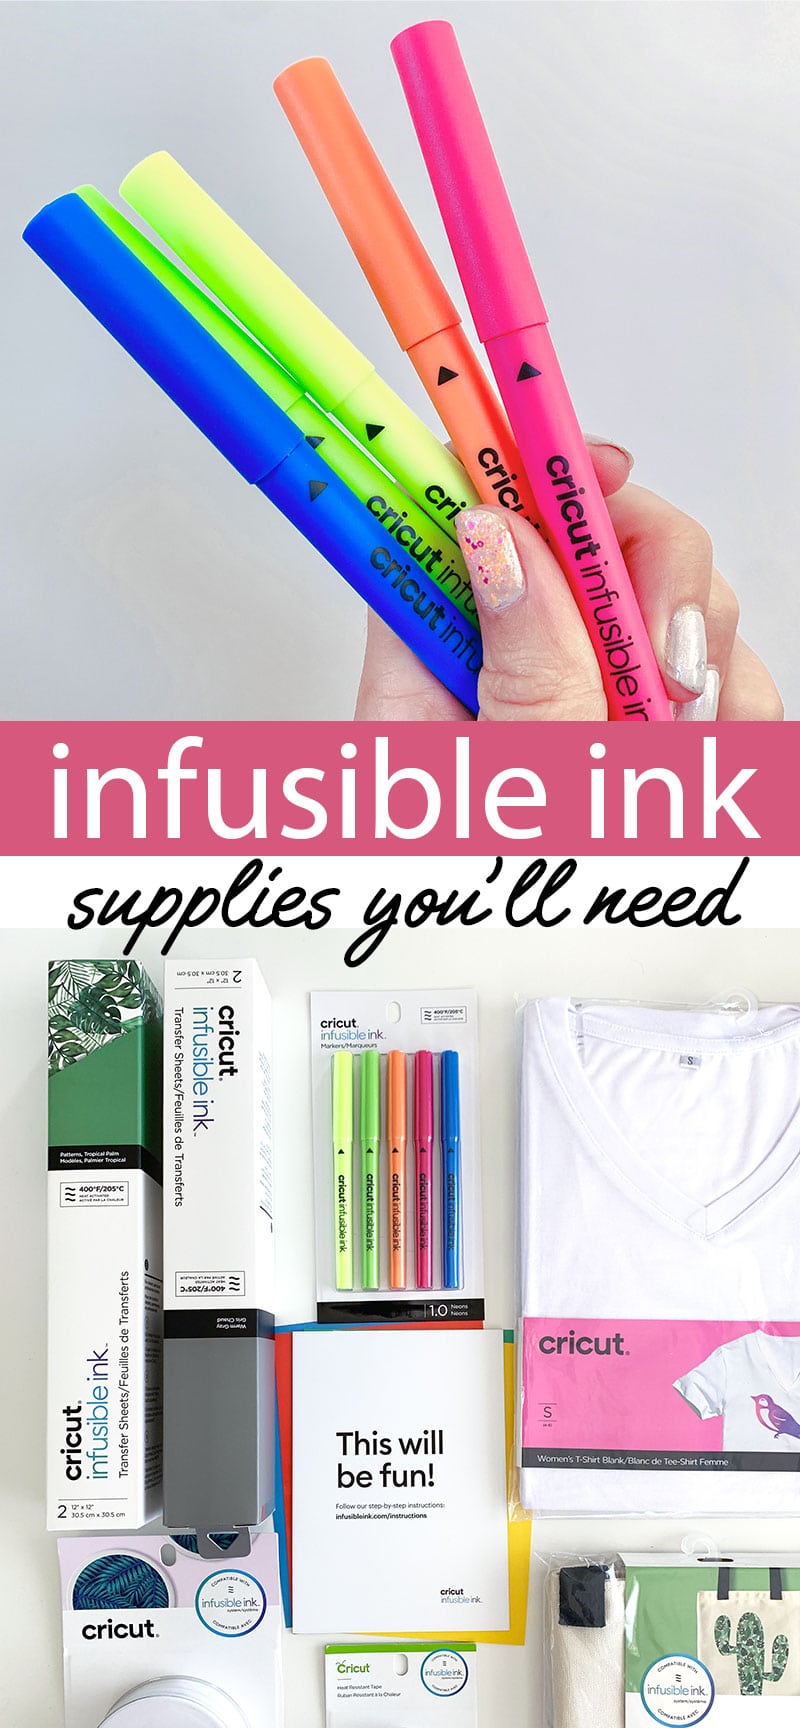 How to use Cricut Infusible Ink transfer sheets and Infusible Ink pens. -  Weekend Craft